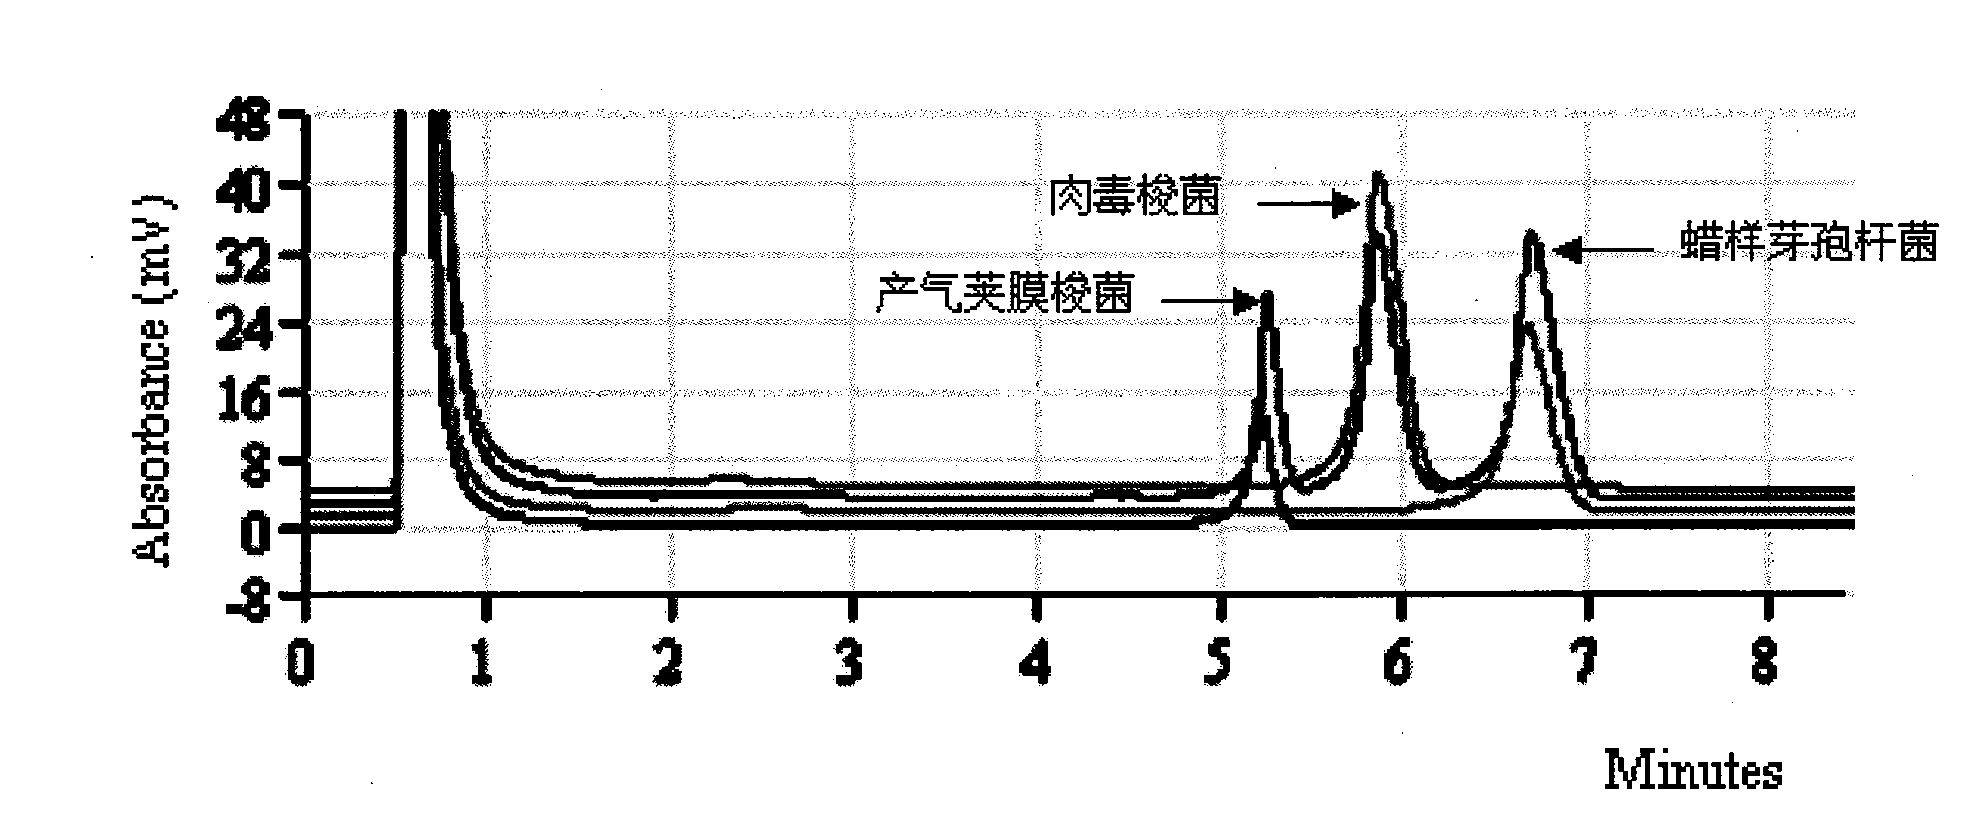 Detection kit for detecting three spore production bacteria in food and detection method thereof